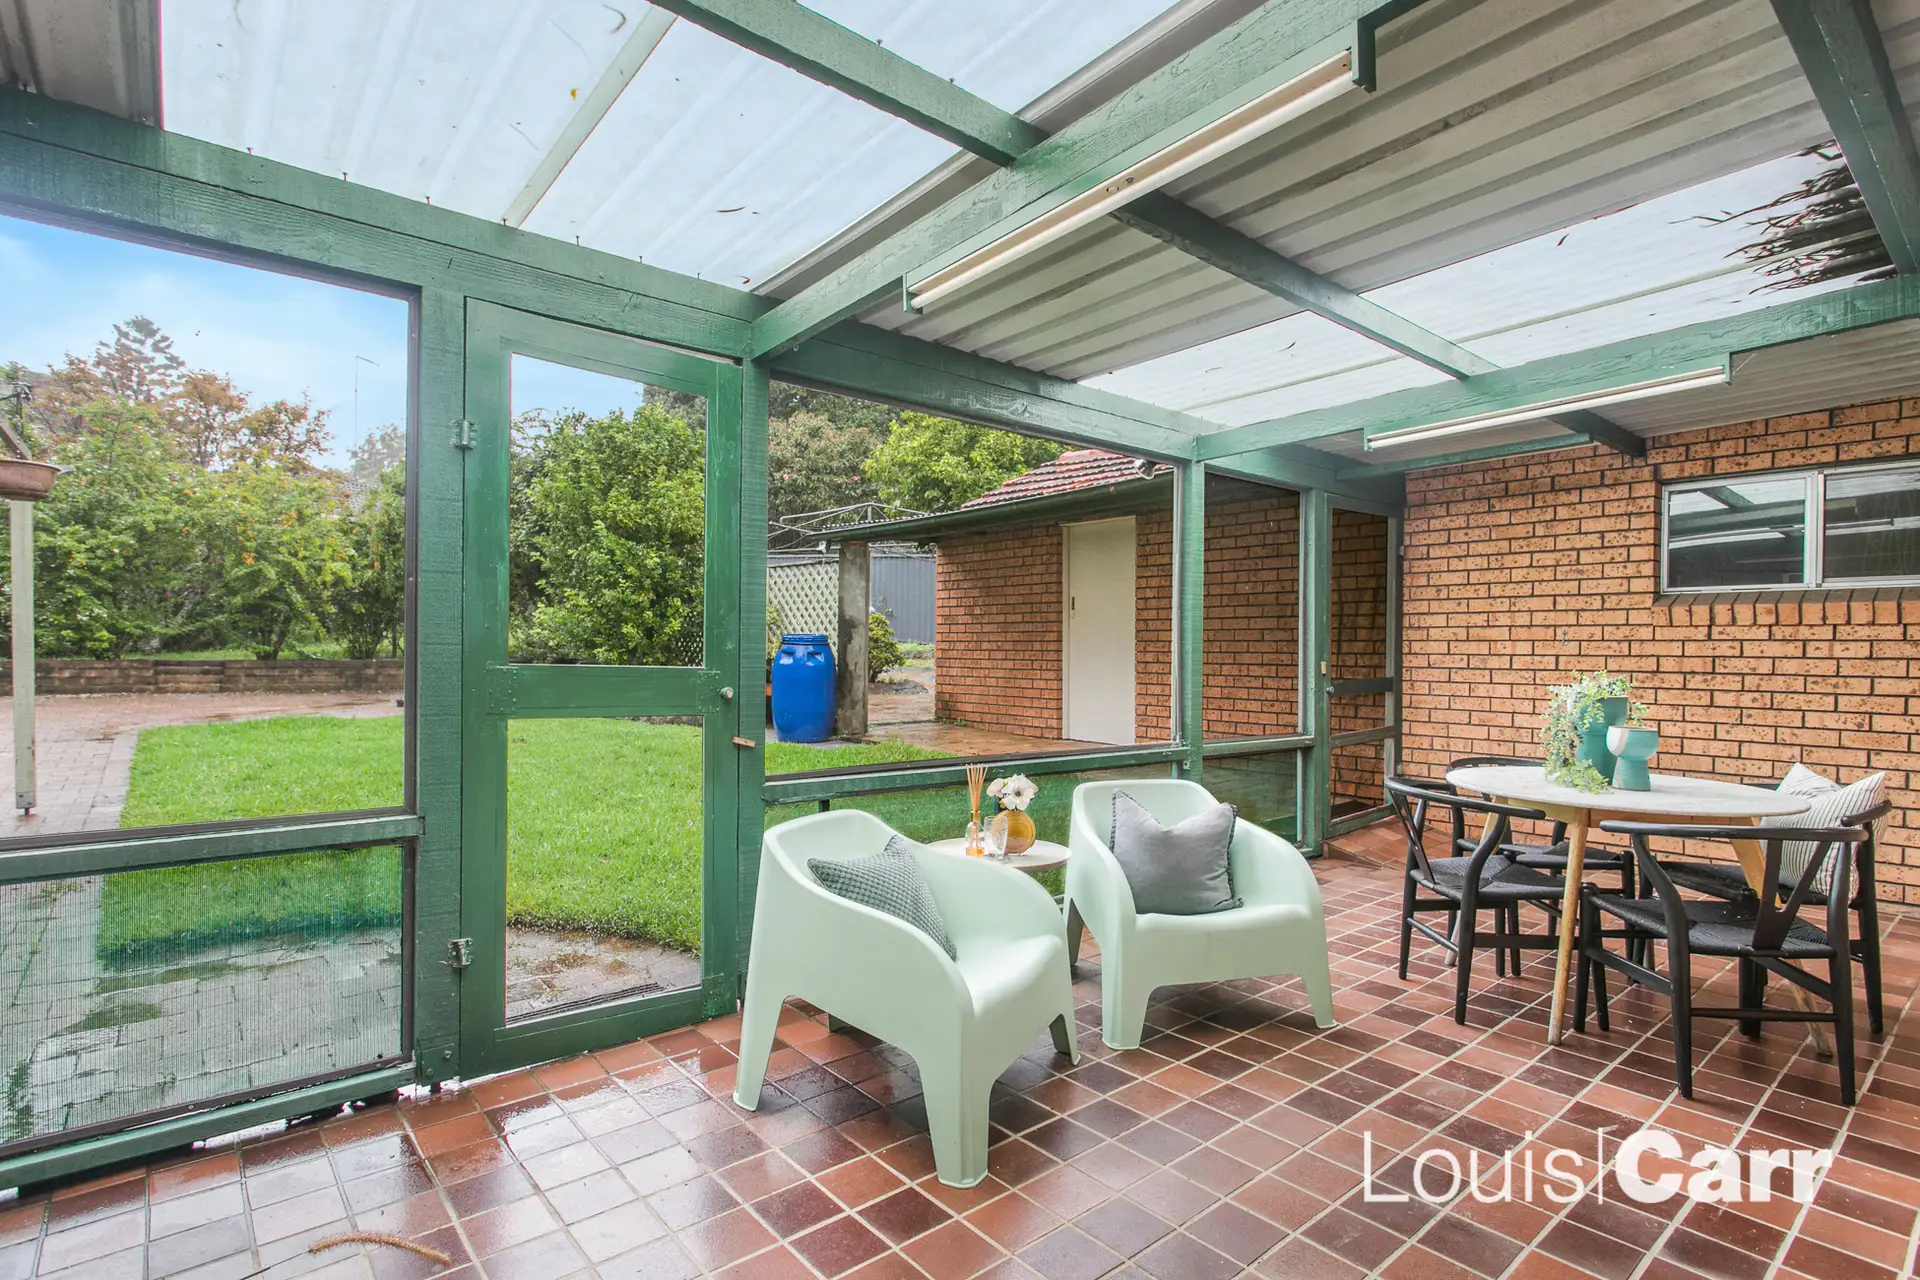 Photo #6: 128 Hull Road, West Pennant Hills - Sold by Louis Carr Real Estate